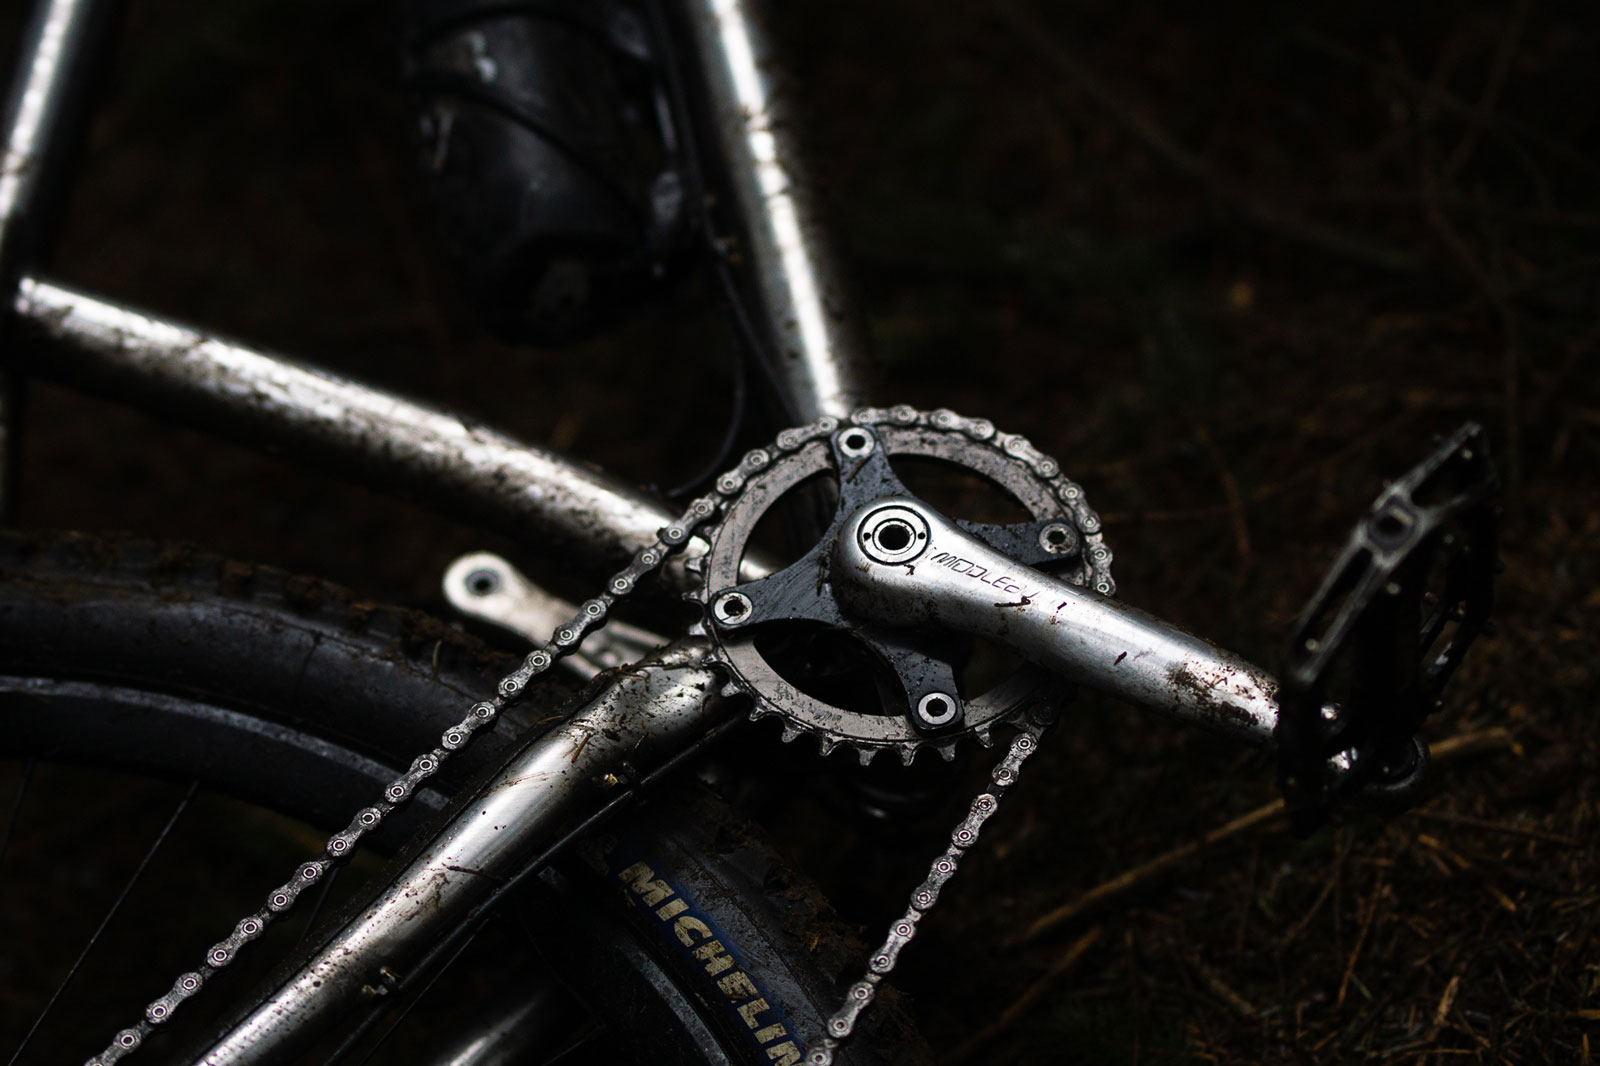 starling roost review complete bike parts include middleburn crankset